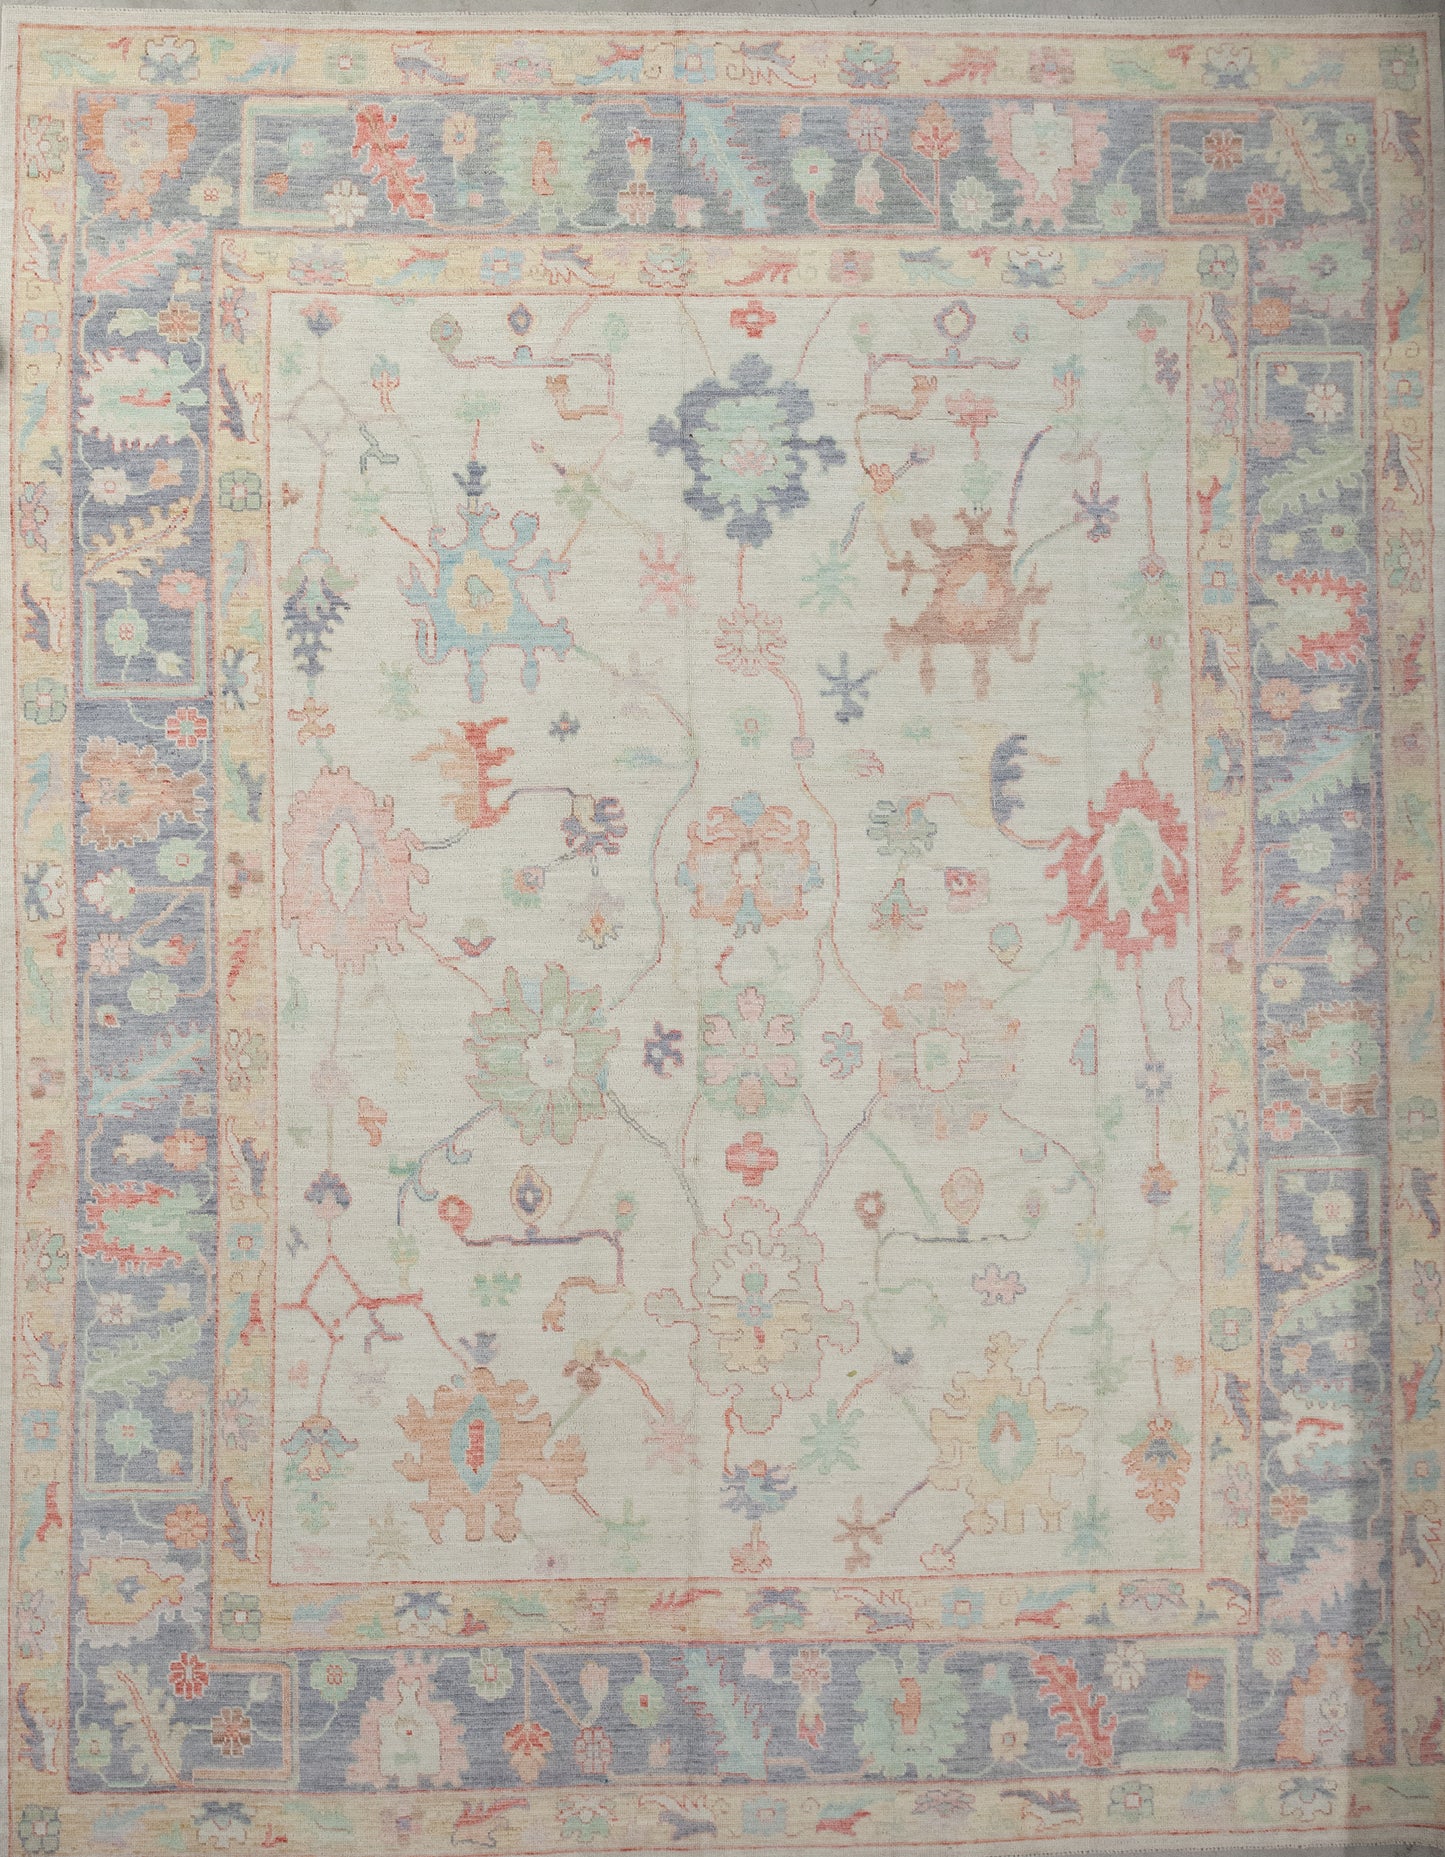 The tasteful carpet was woven with beige as the dominant color which evokes healing and protection feelings for your environment. Also, the design features a composition made of peonies' flowers in green, orange, blue, pink, and red.